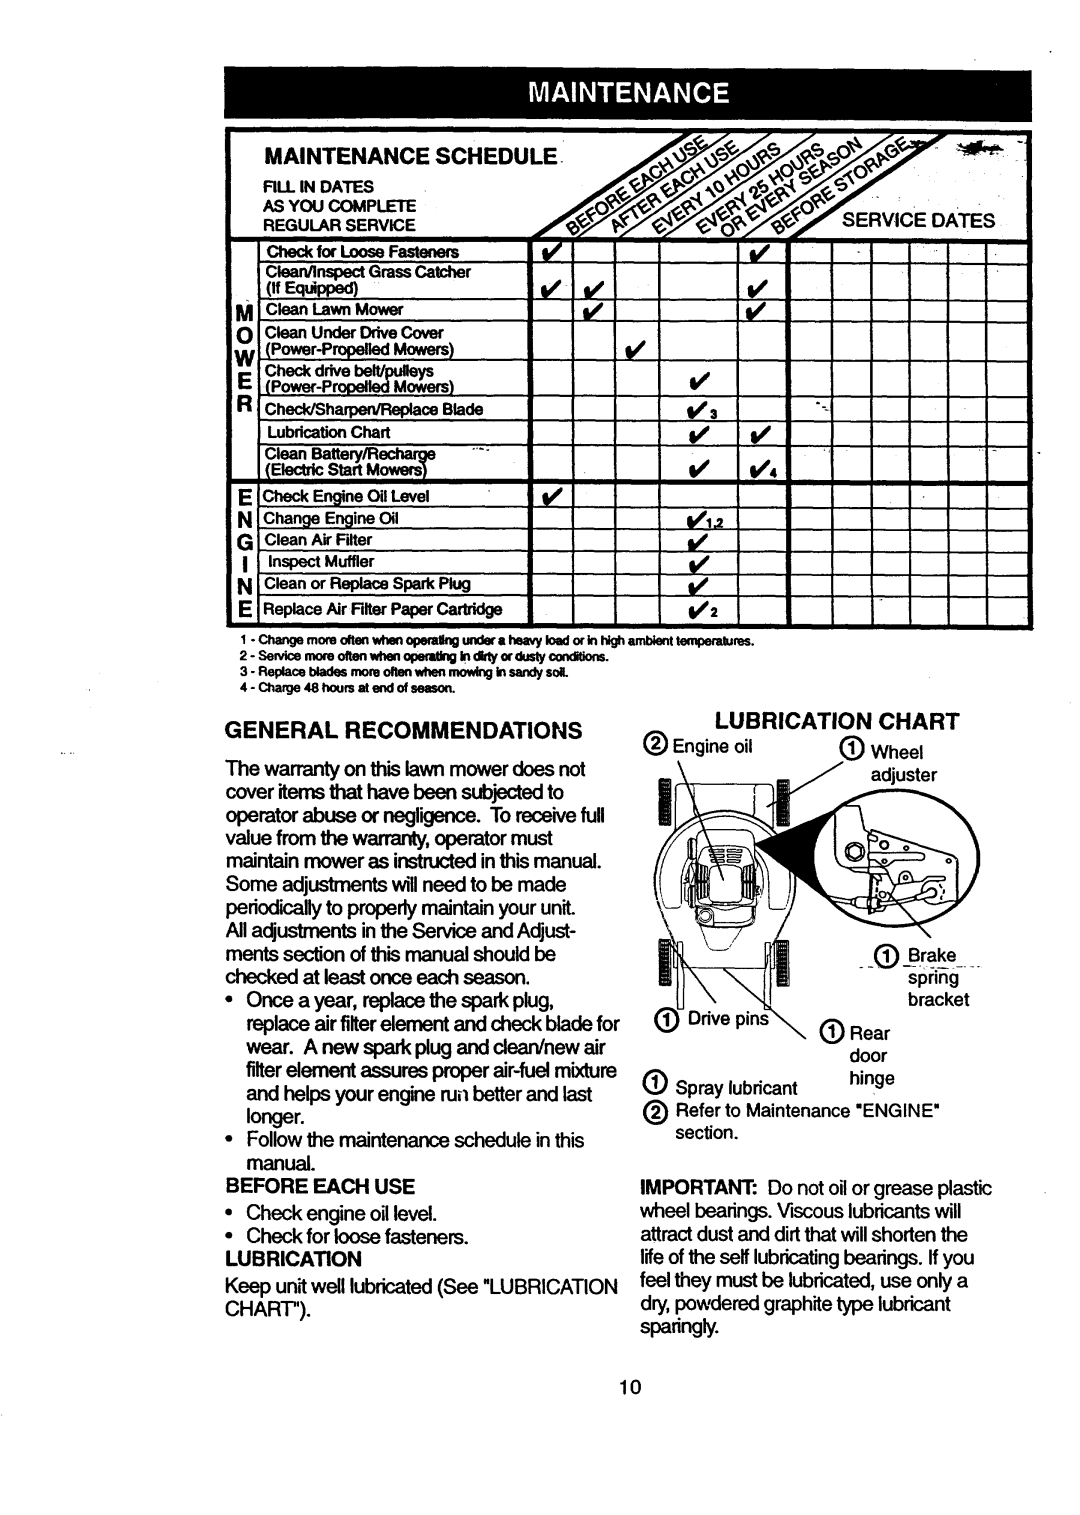 Craftsman 917.377631 owner manual spa ngly, Lu_caUonChart, General Recommendations, As Youcomplete 